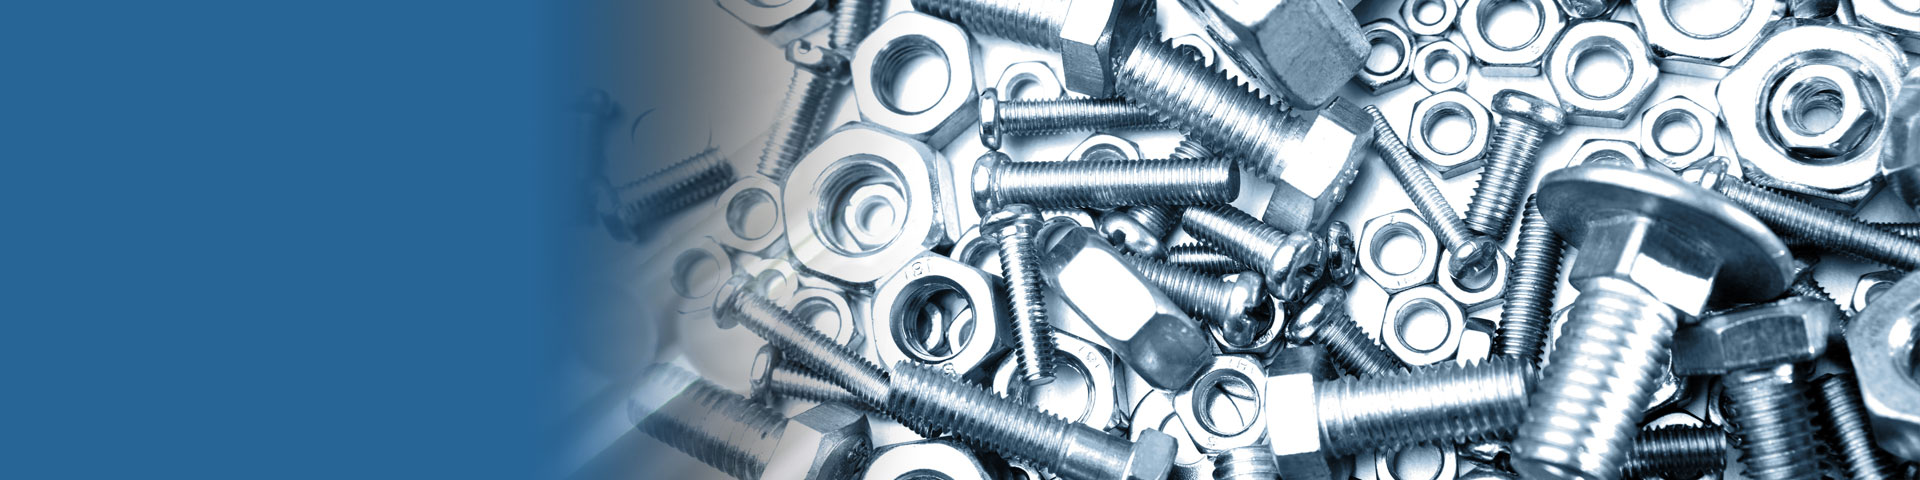 309 Stainless Steel Fasteners